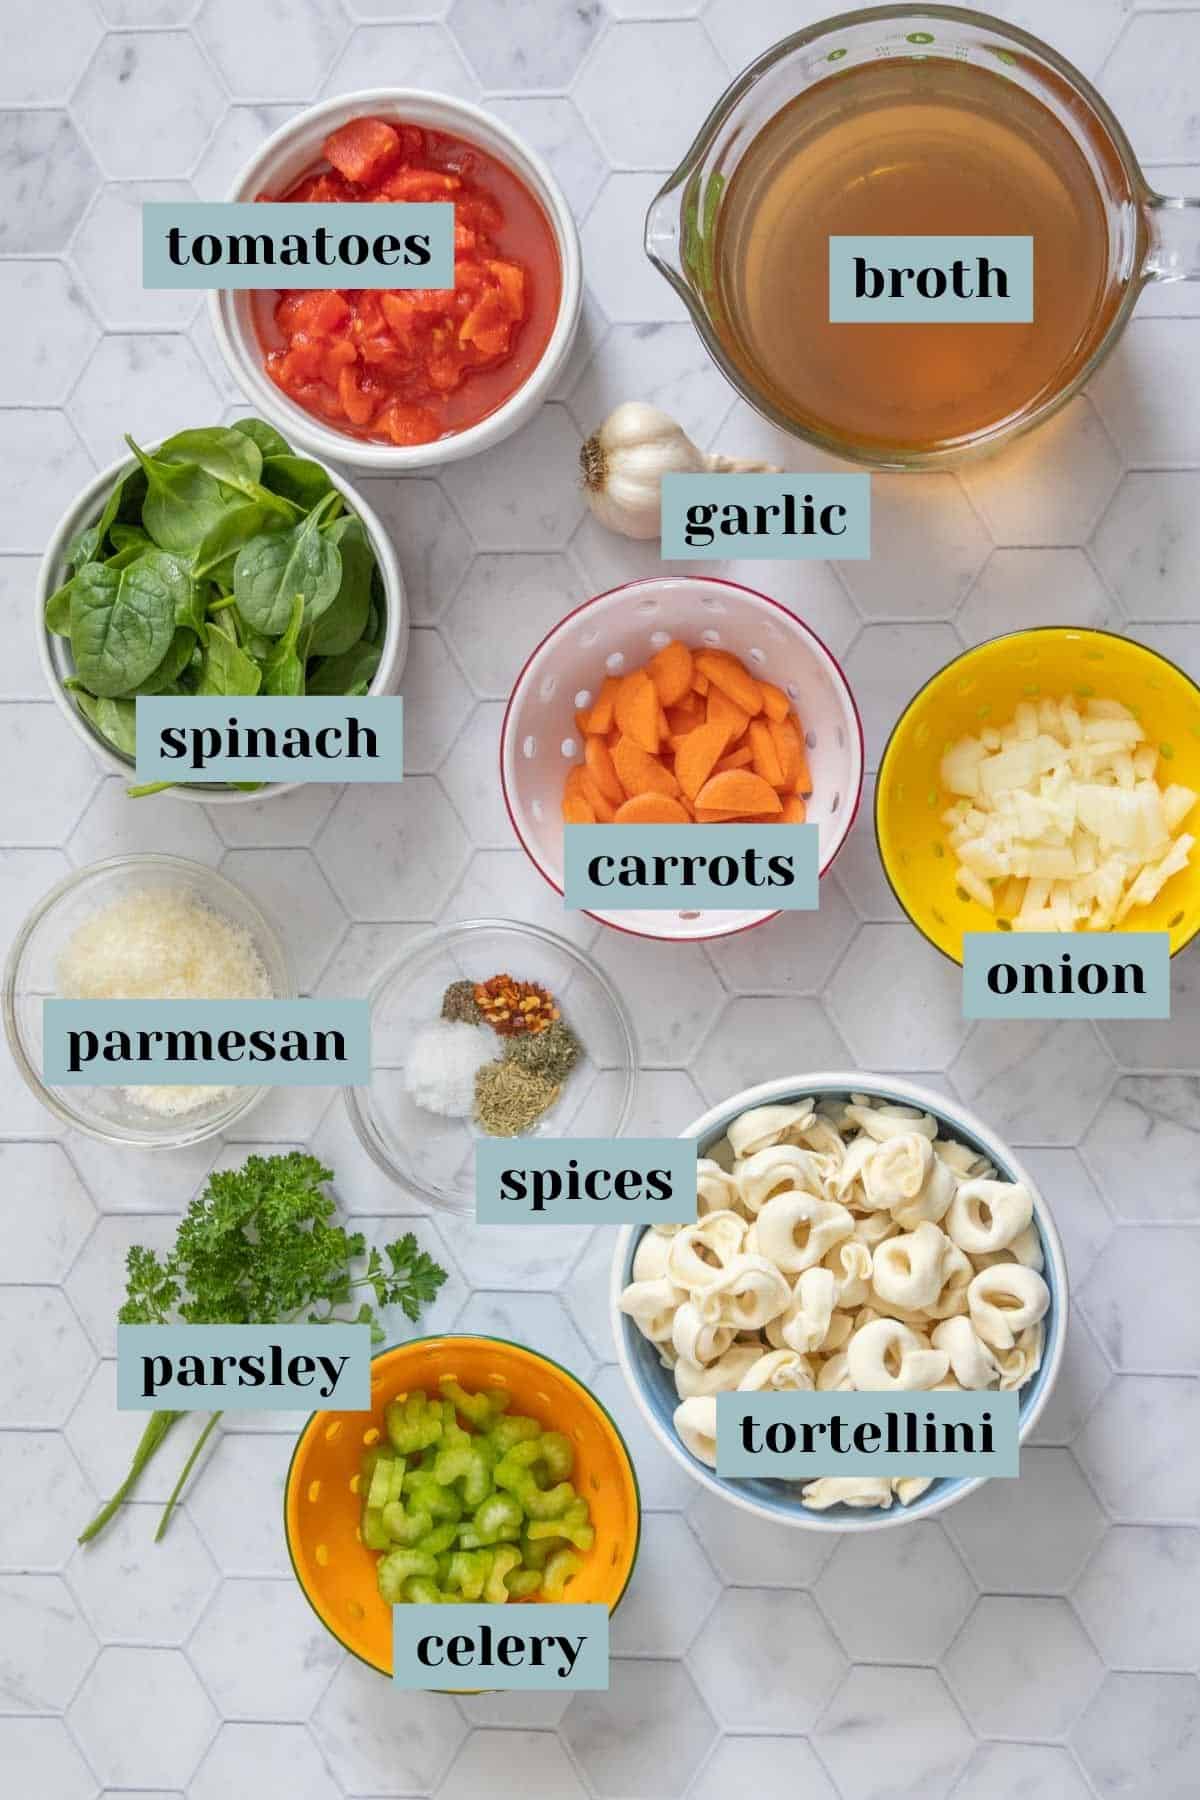 Ingredients for instant pot tortellini soup on a tile surface with labels.